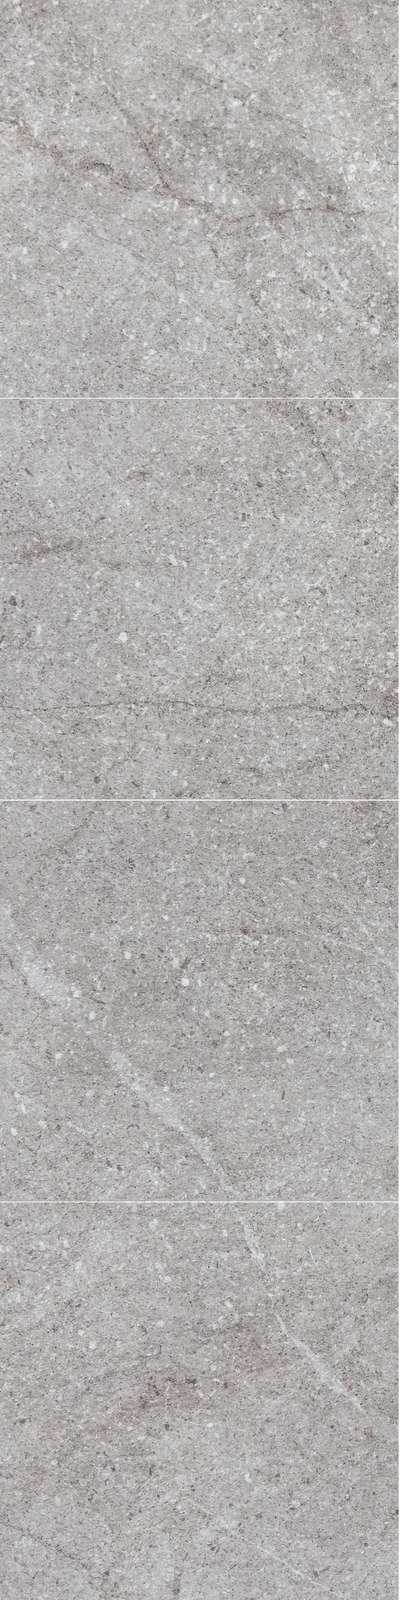 8304 PolishedStone M6060 with grout line